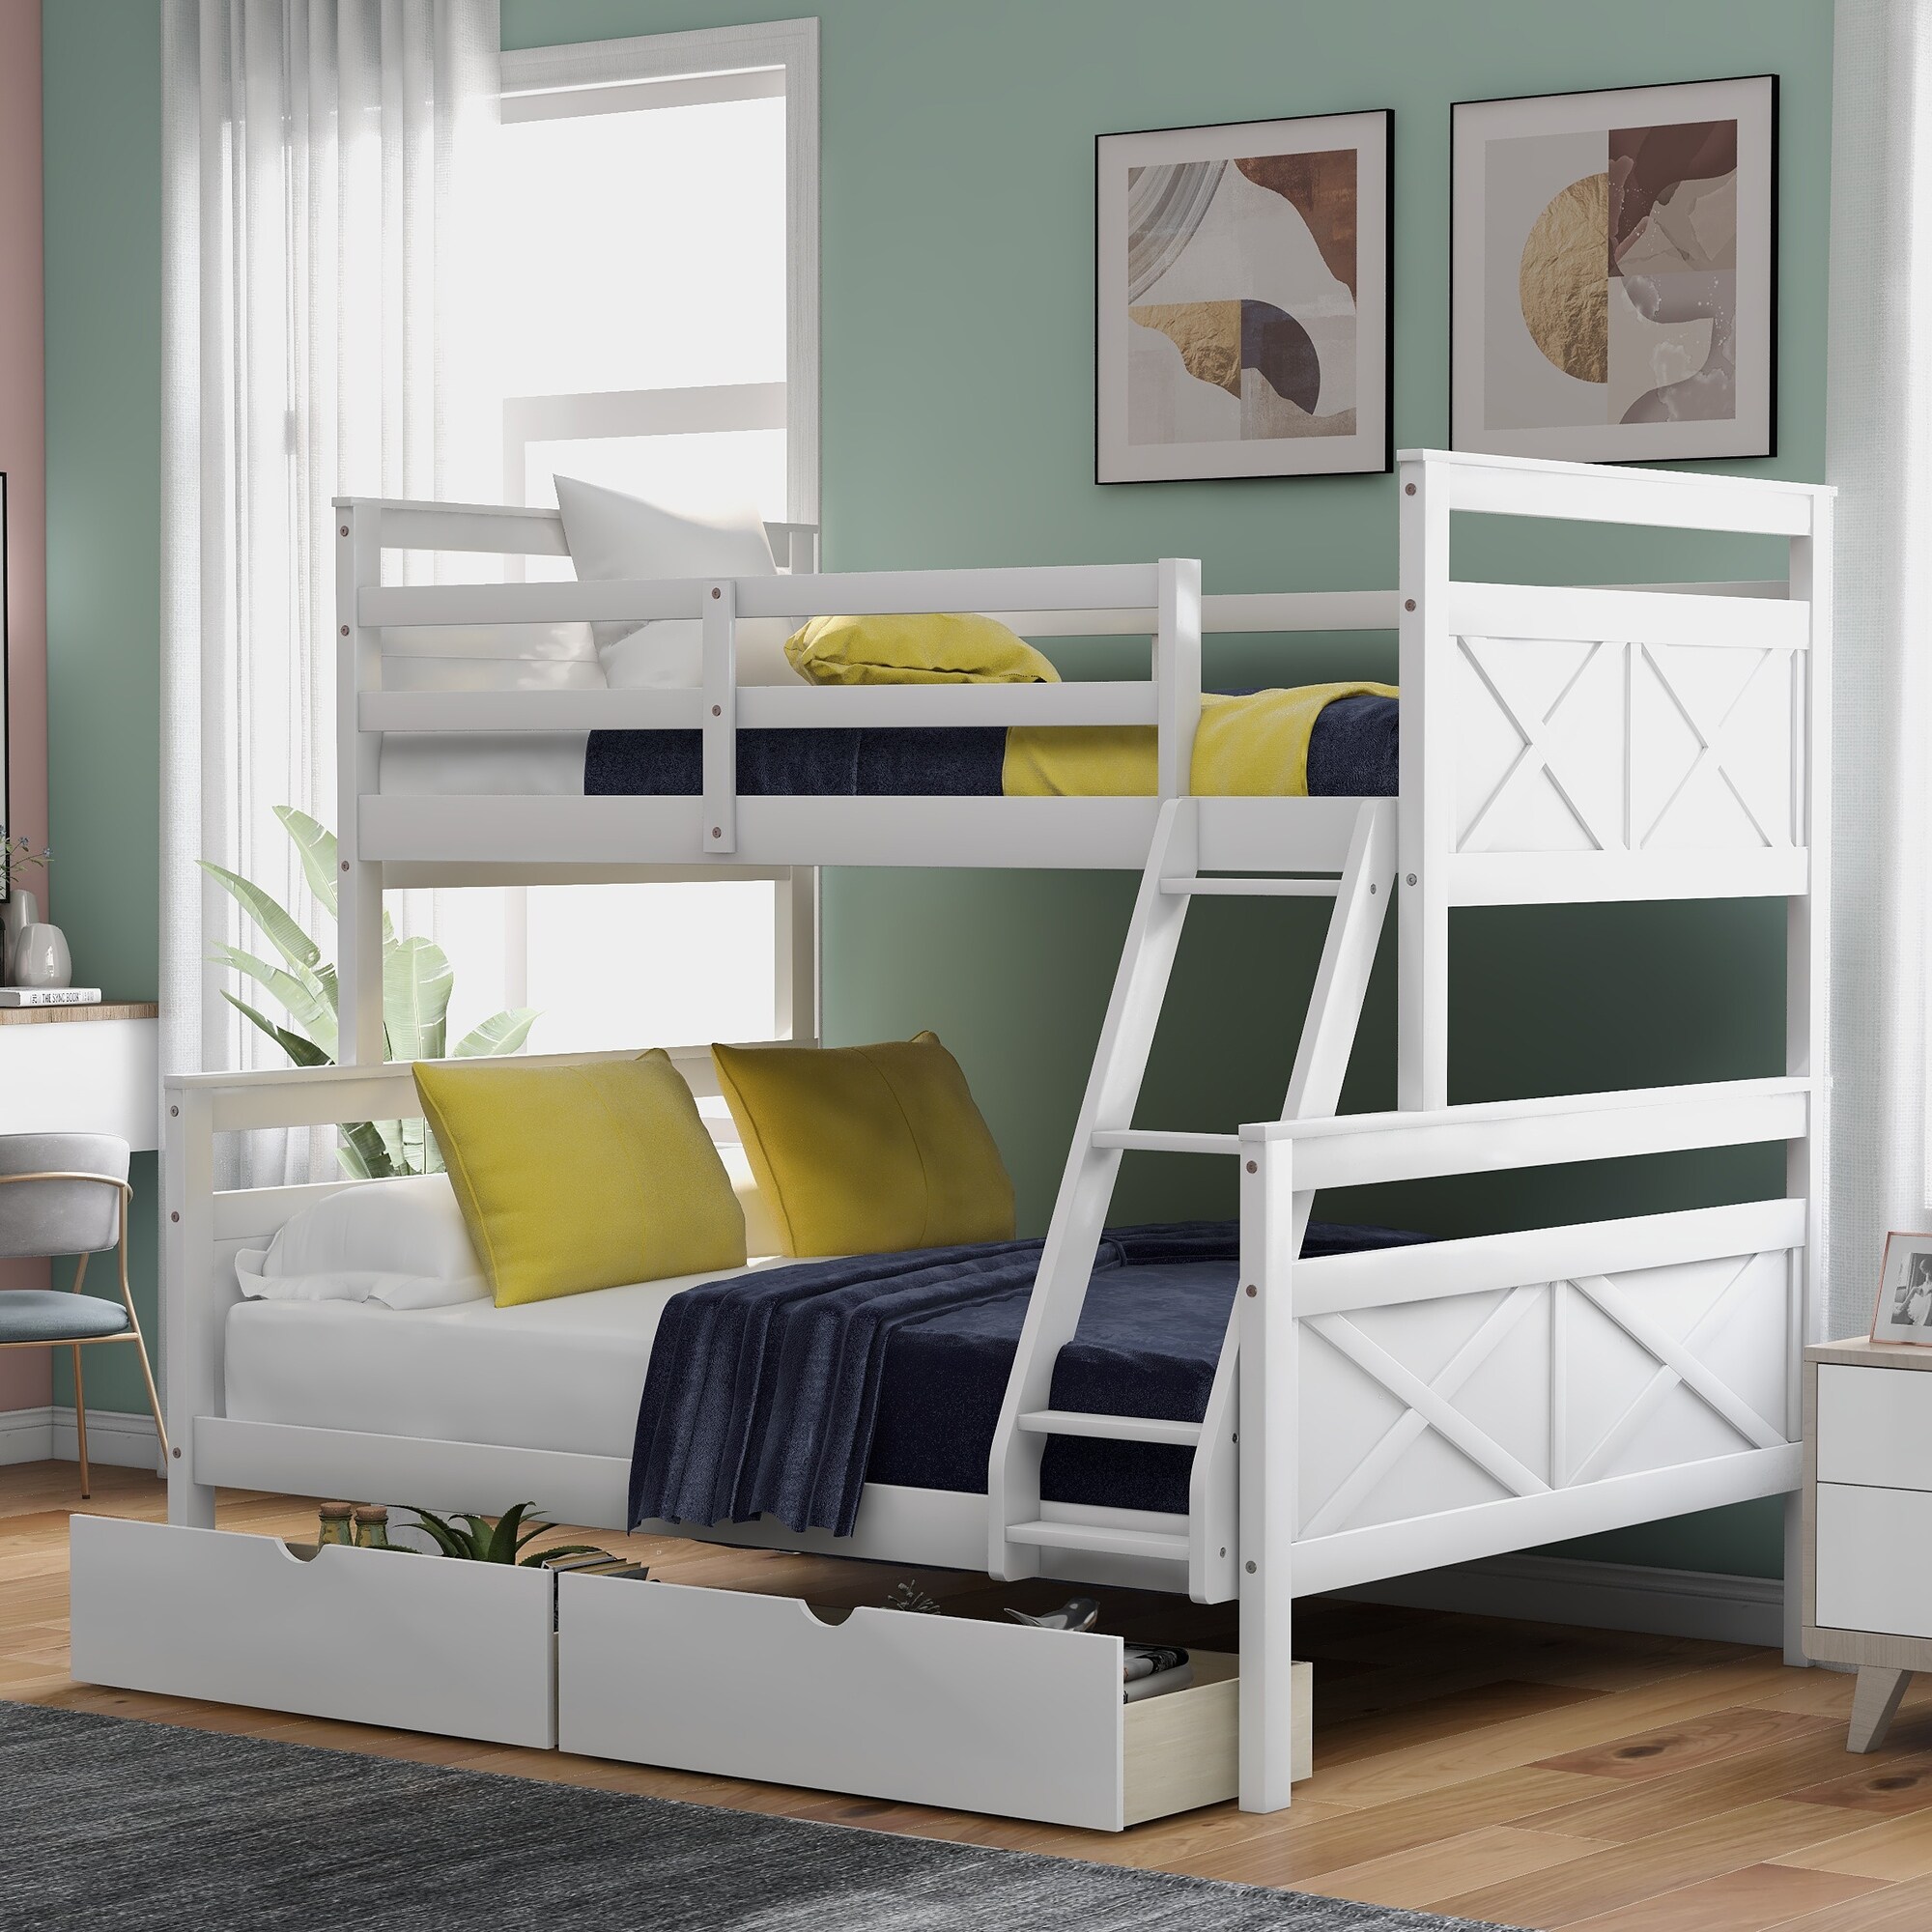 twin over full bed frame